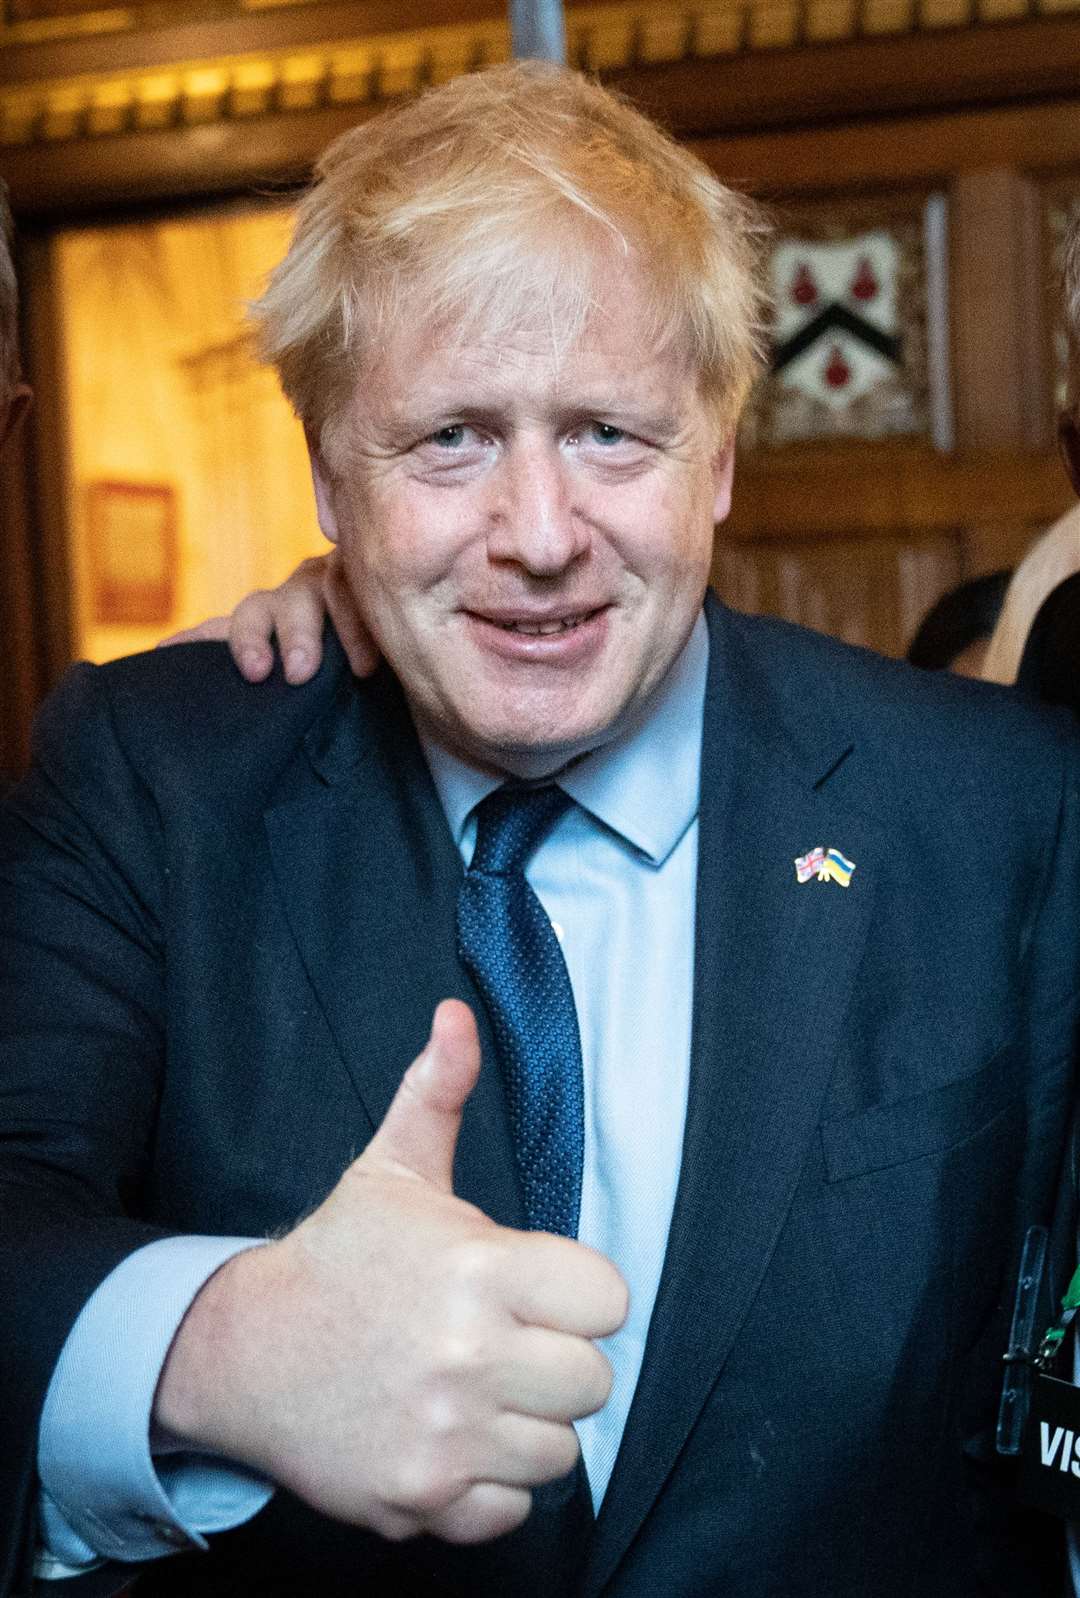 Prime Minister Boris Johnson at a reception in Parliament on Tuesday (Stefan Rousseau/PA)